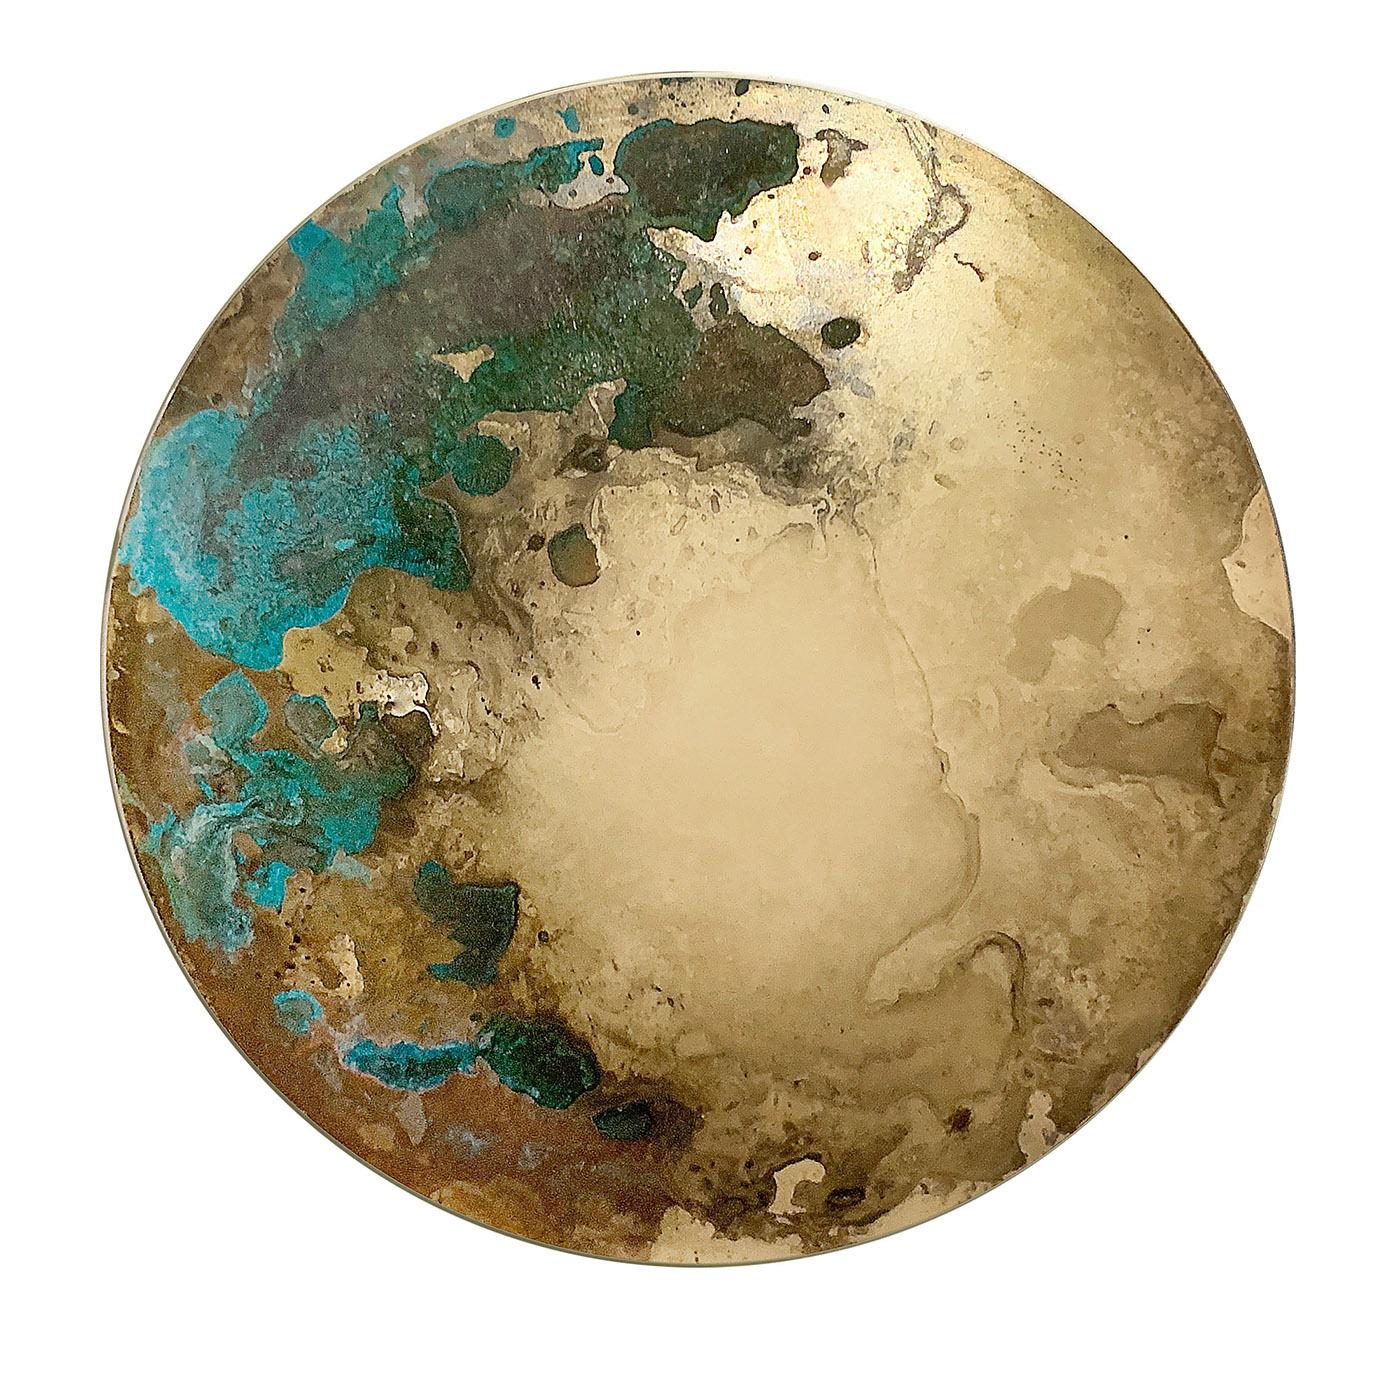 A masterful and artful interplay between acids and oxides applied to the brass lends this decorative disk its outstanding artistic character. Turquoise, green, gold, and beige all merge within unpredictable traceries that vary from piece to piece